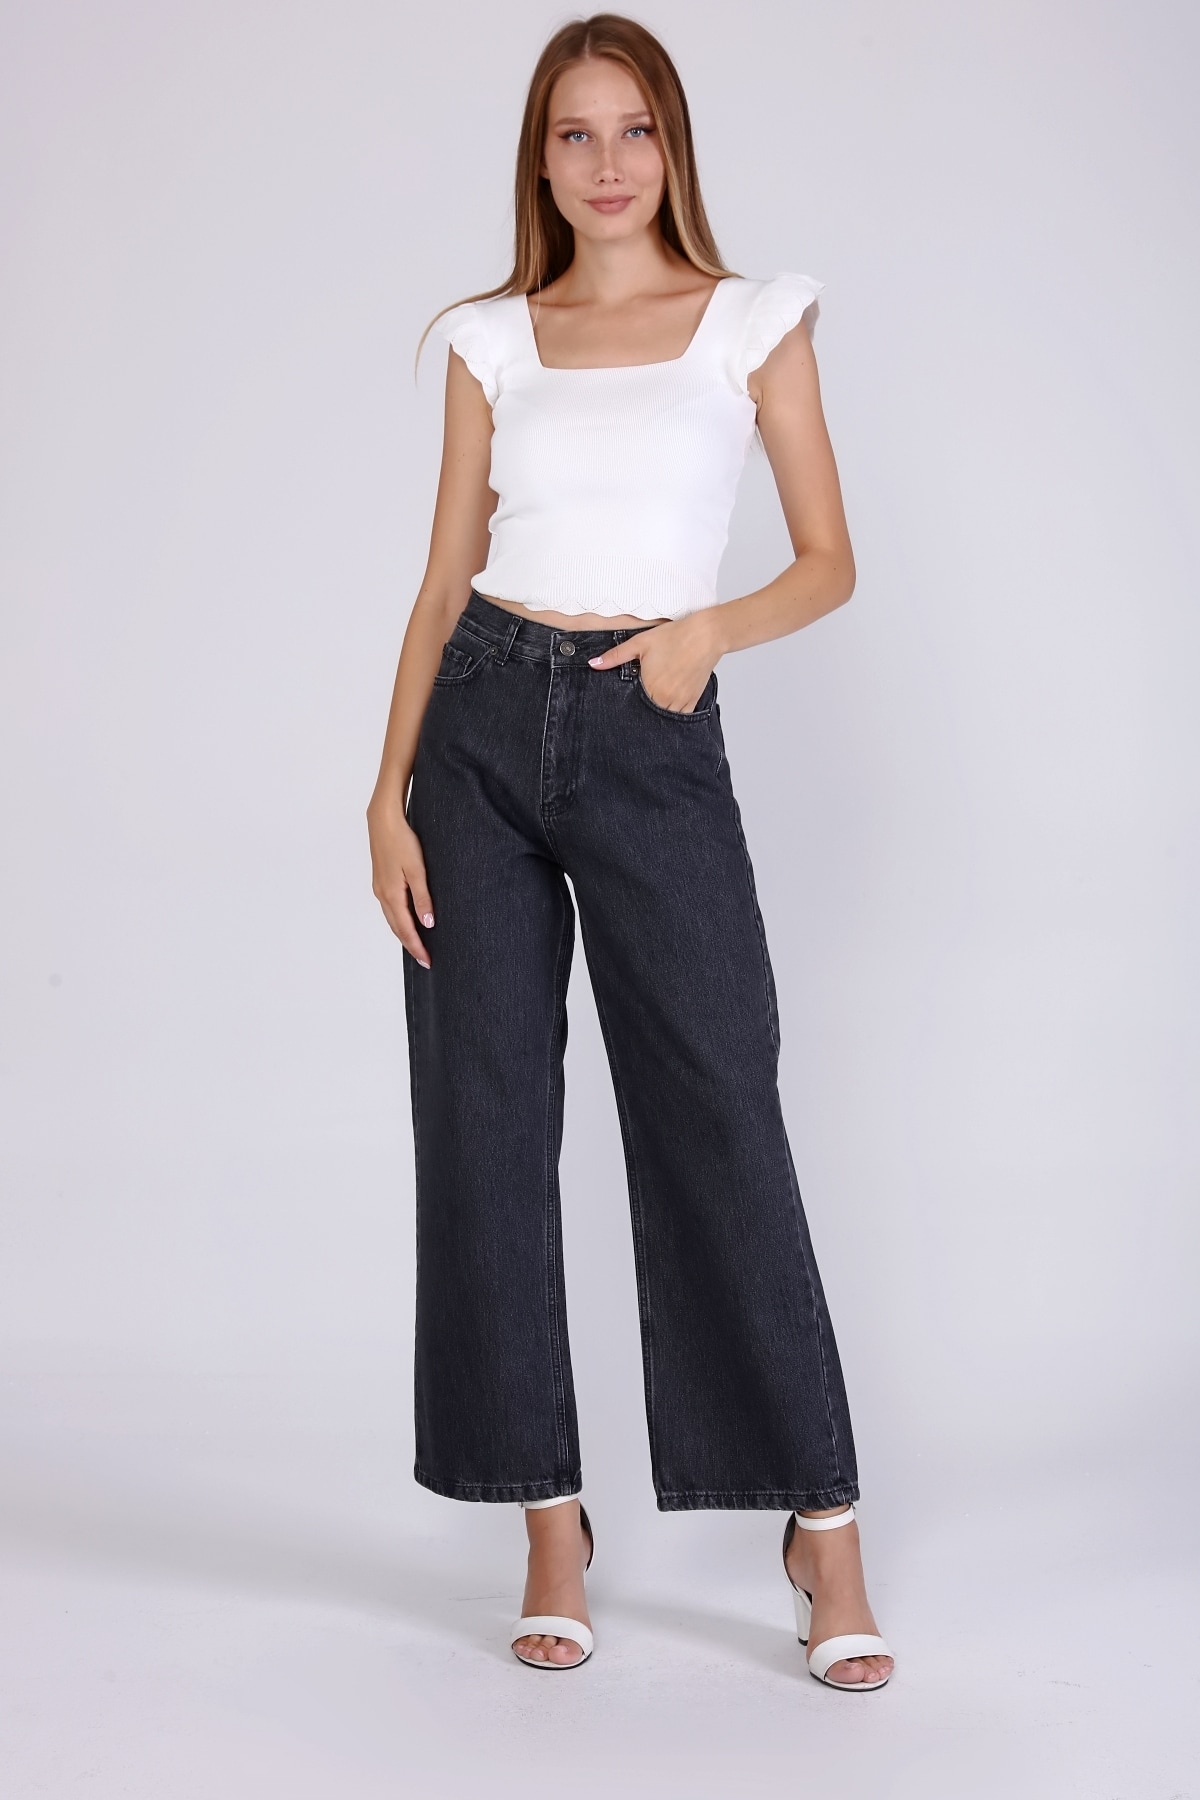 Wholesale Palazzo Jeans No.2 - NTC Jeans Manufacturing - Wholesale ...